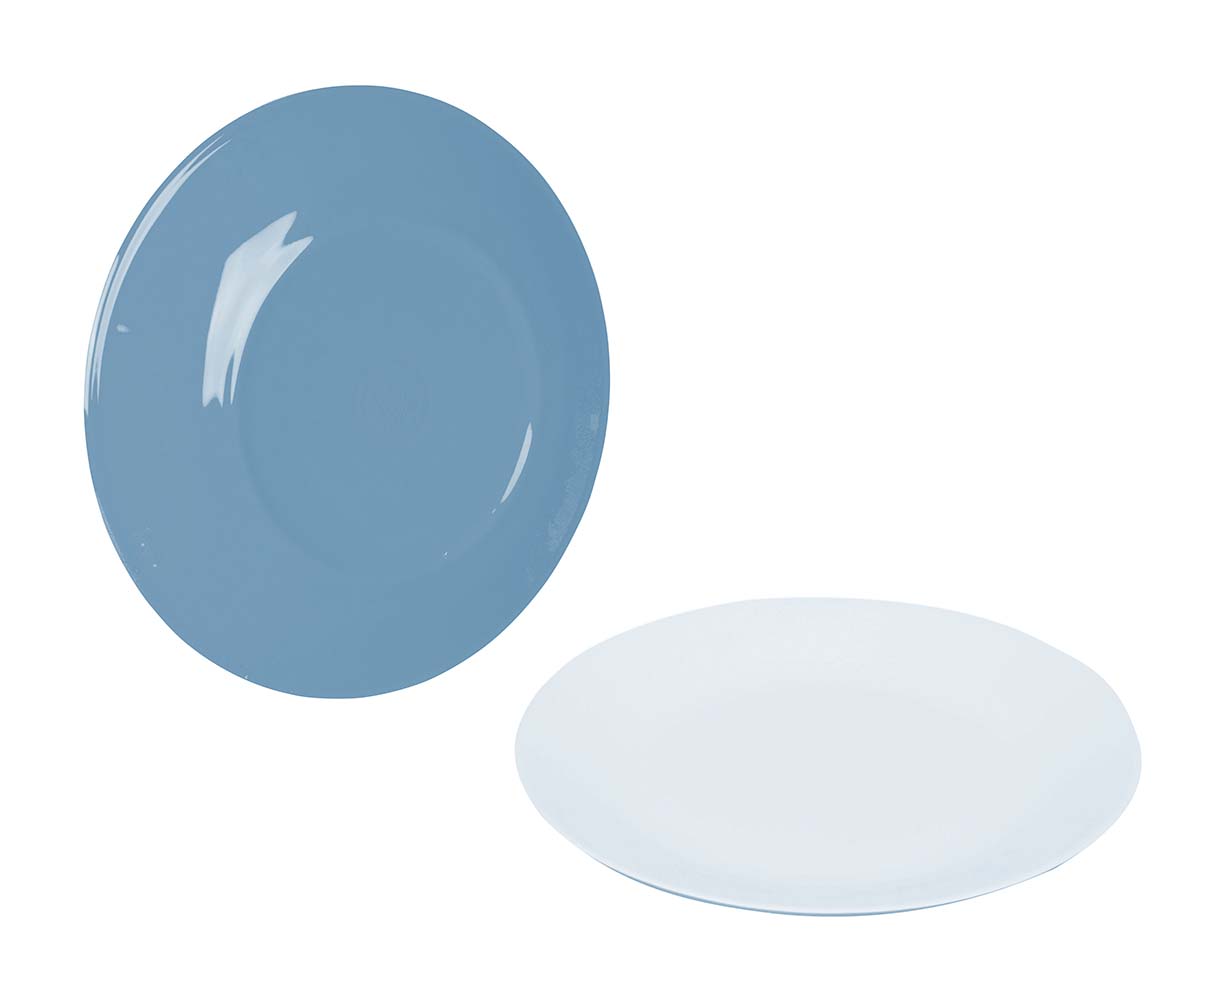 6181280 A 100% melamine breakfast plate. This high quality melamine breakfast plate is virtually unbreakable and weighs very little. In addition, the plate is scratch-resistant and dishwasher safe.